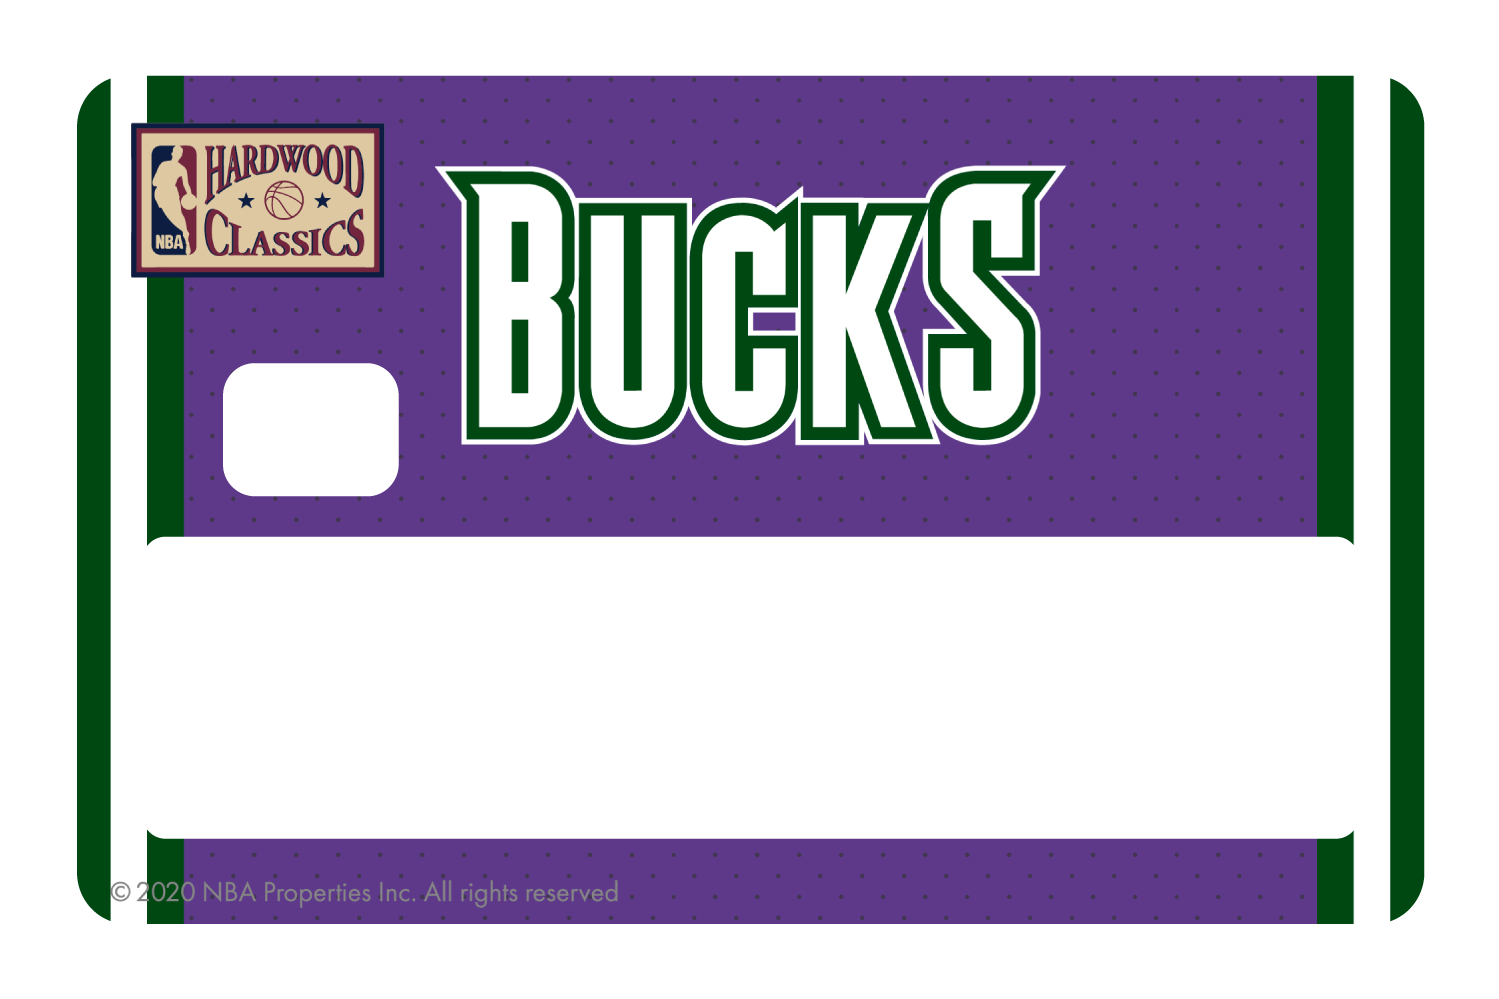 Credit Debit Card Skins | Cucu Covers - Customize Any Bank Card - Minnesota Timberwolves: Retro Courtside Hardwood Classics, Half Cover / Small Chip